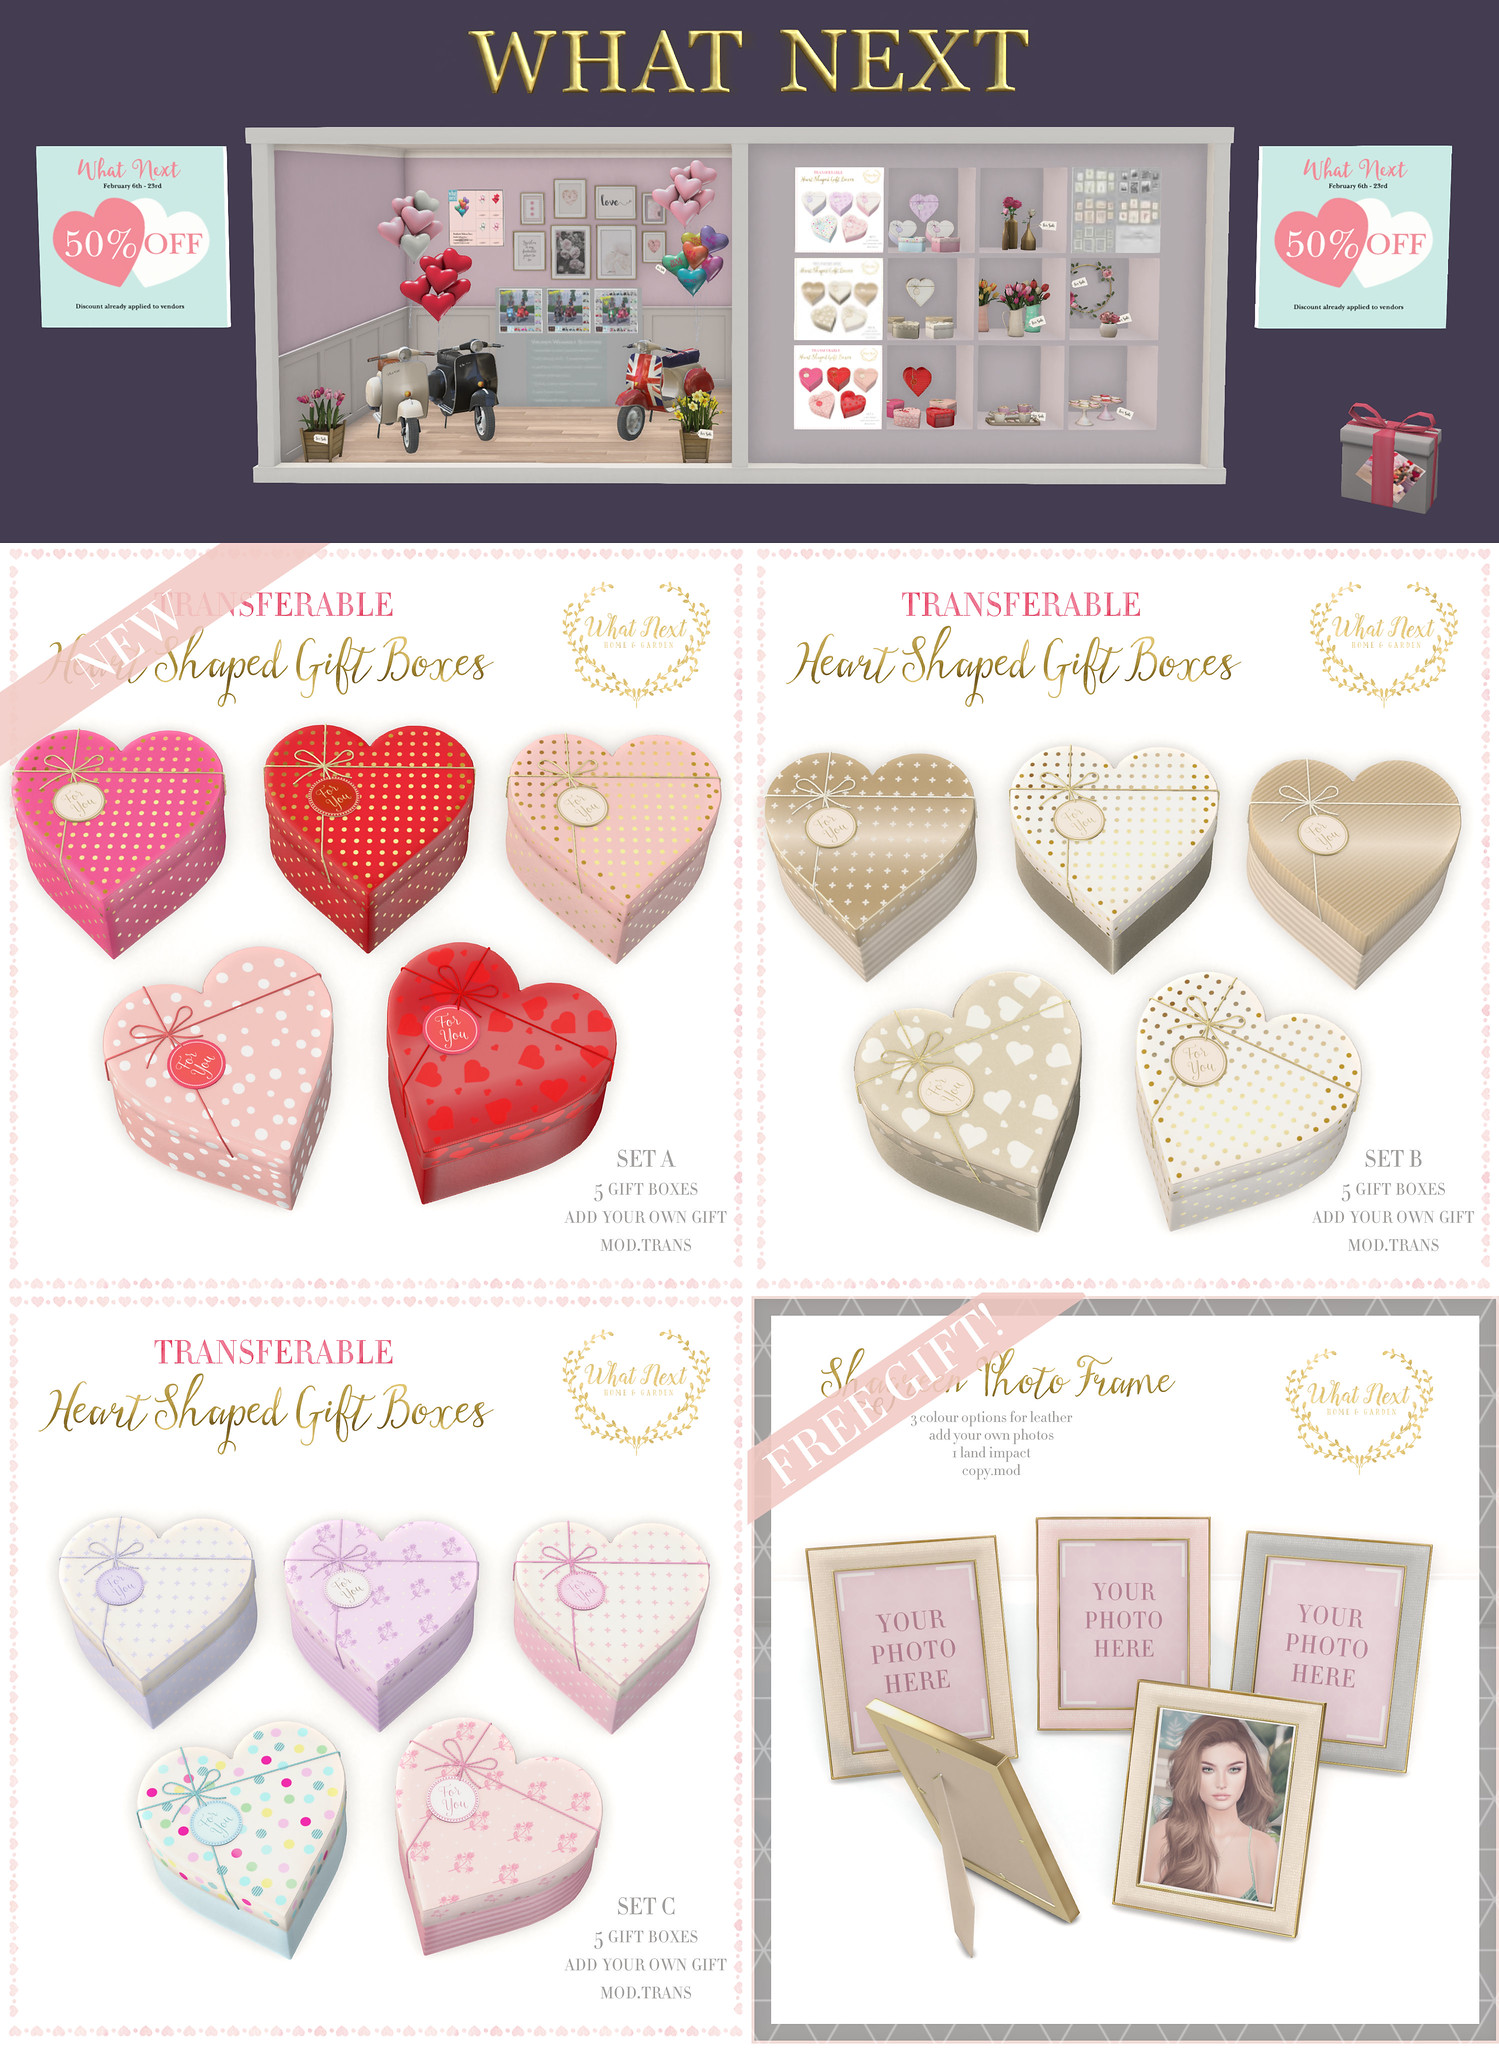 What Next – Heart Shaped Gift Boxes